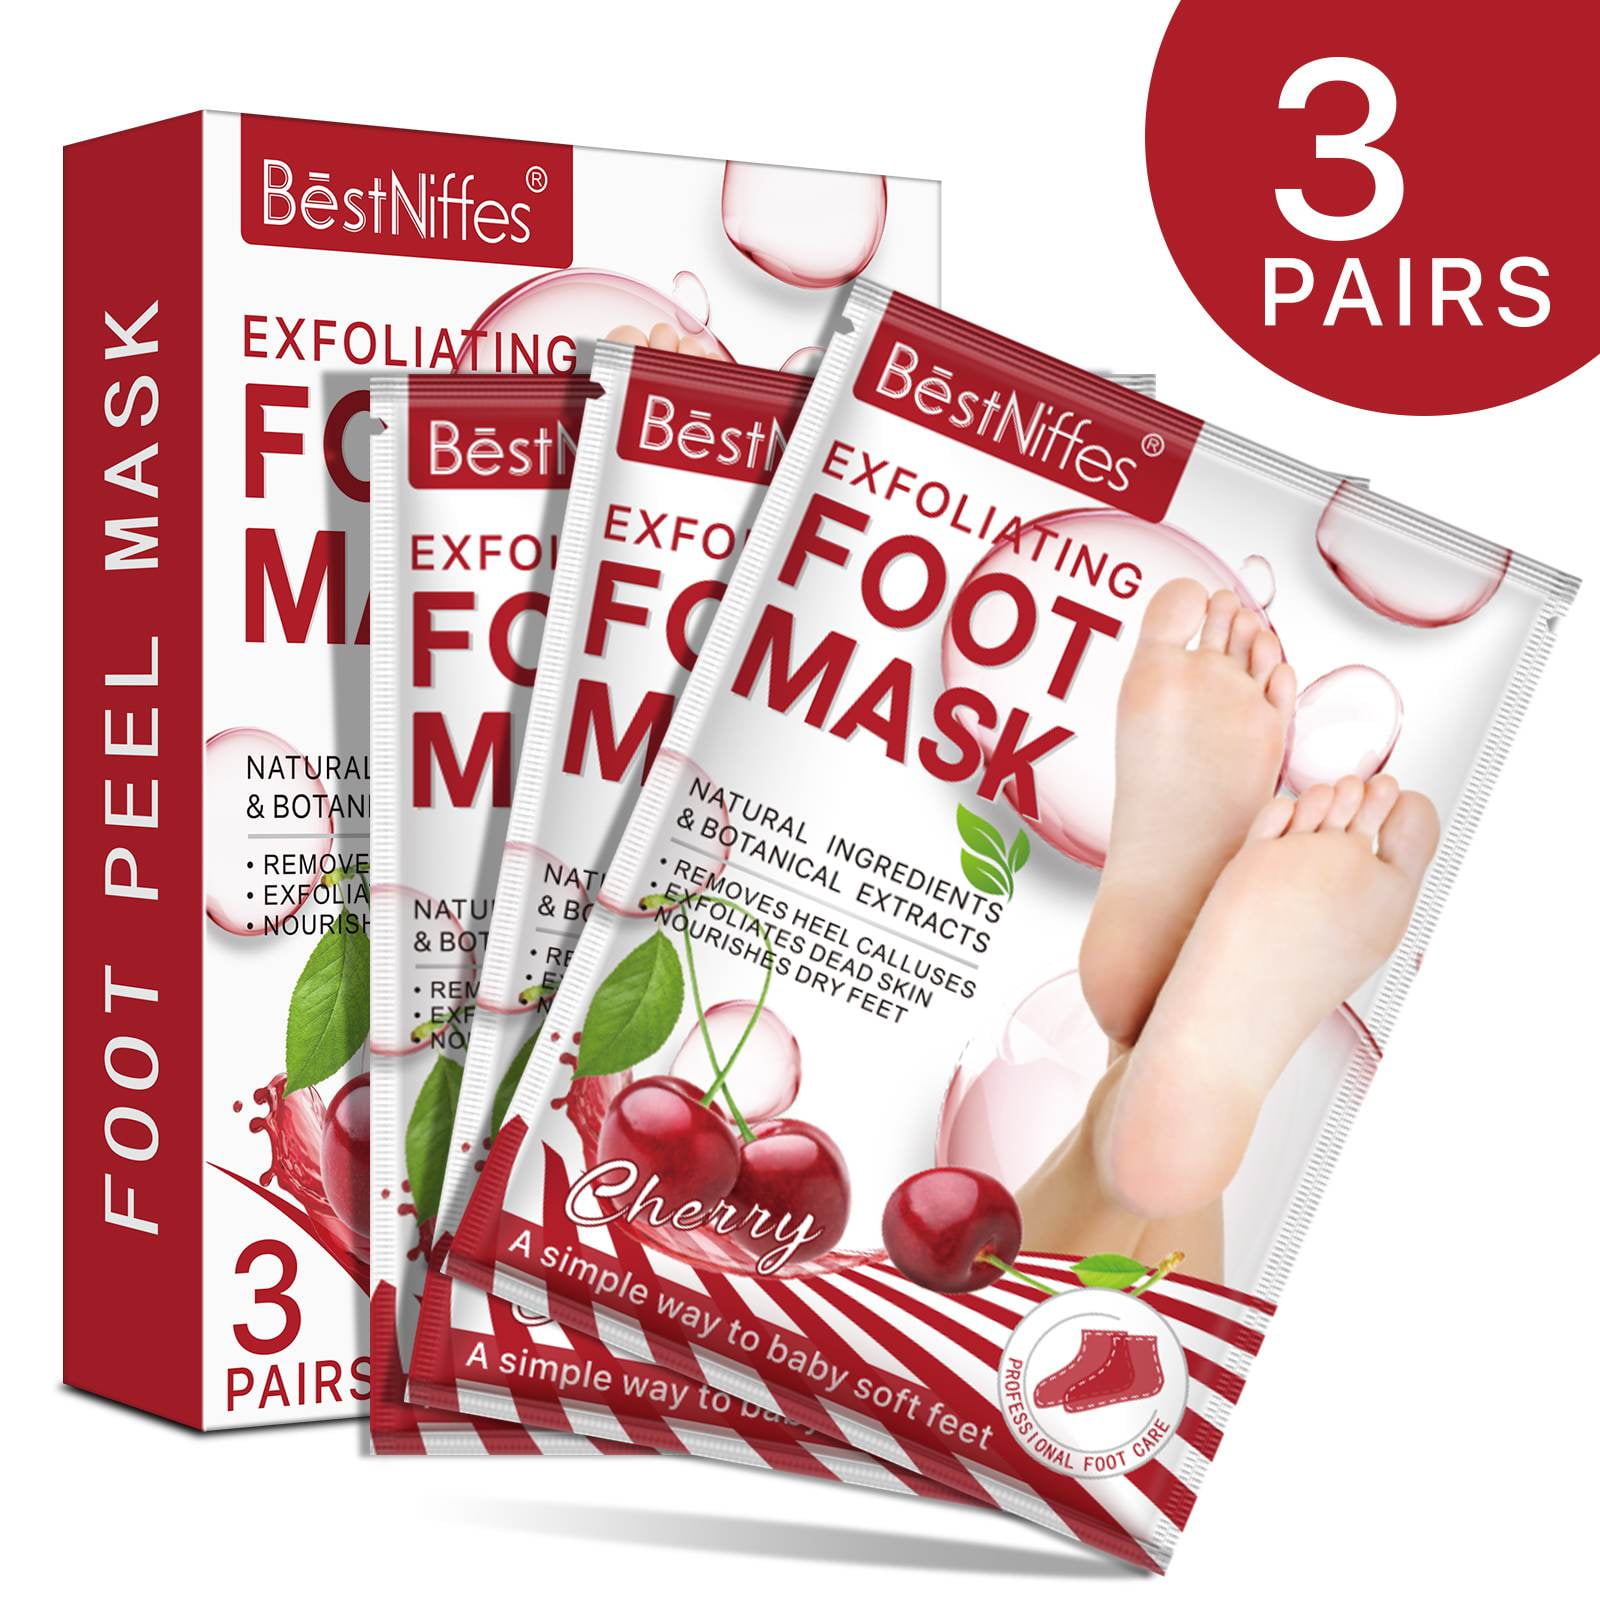 Skin Care Ginseng Extract Remove Foot Dead Skin Mask Foot Care Peeling  Exfoliating Skin Socks Whitening Beauty Feet Care Cream 